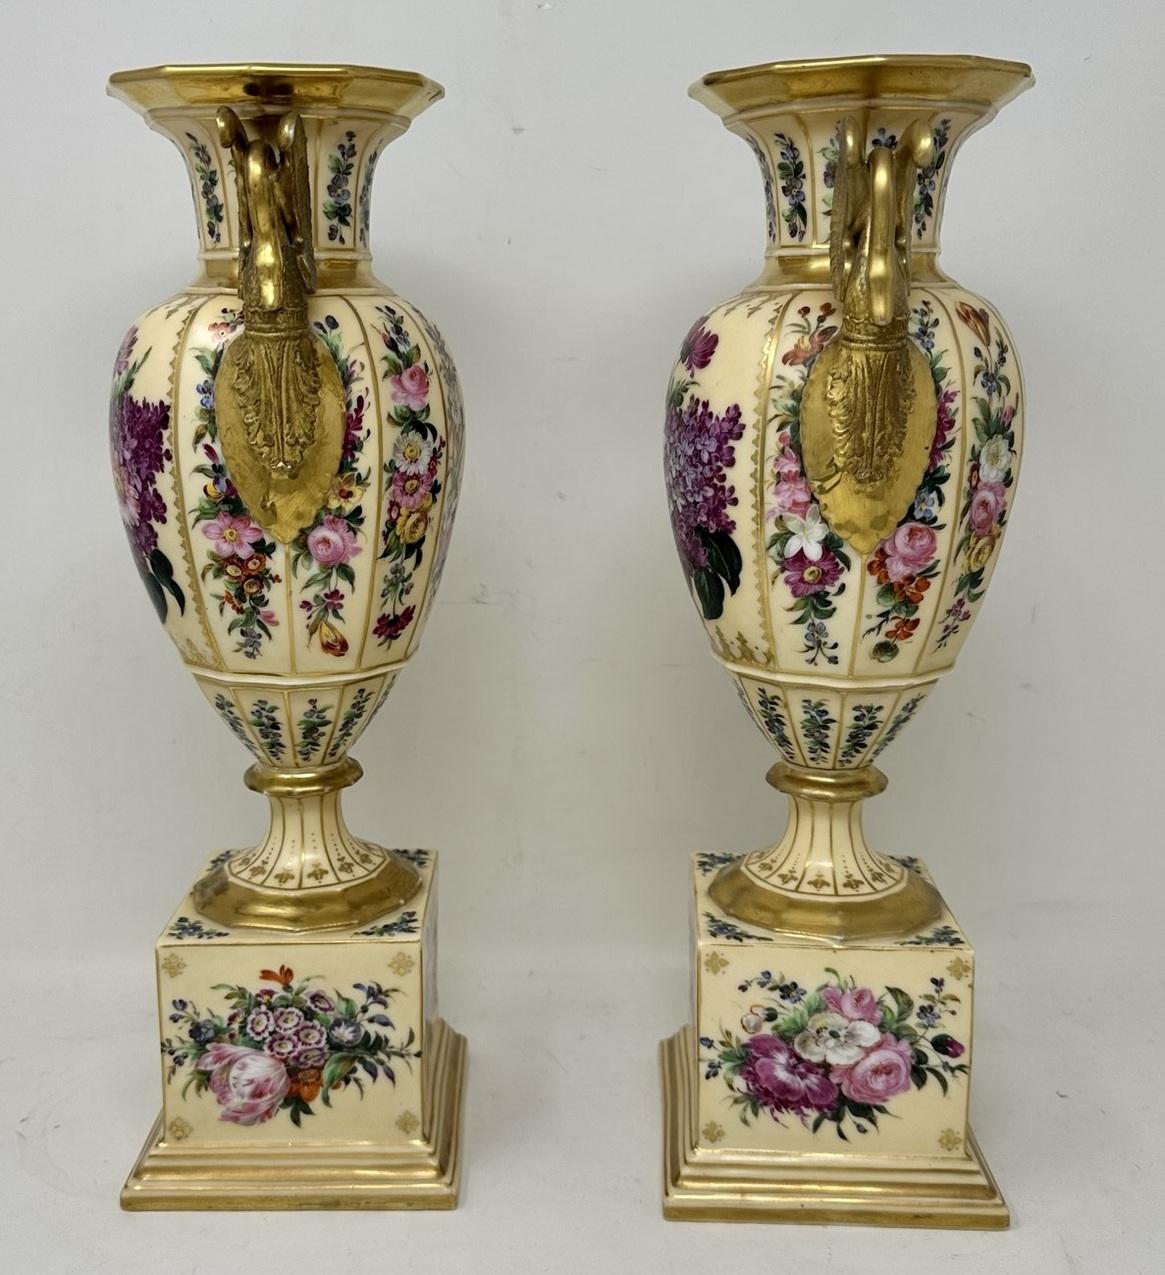 Early Victorian Antique Pair French Sèvres Style Porcelain Gilt Mounted Urns Vases Centerpieces